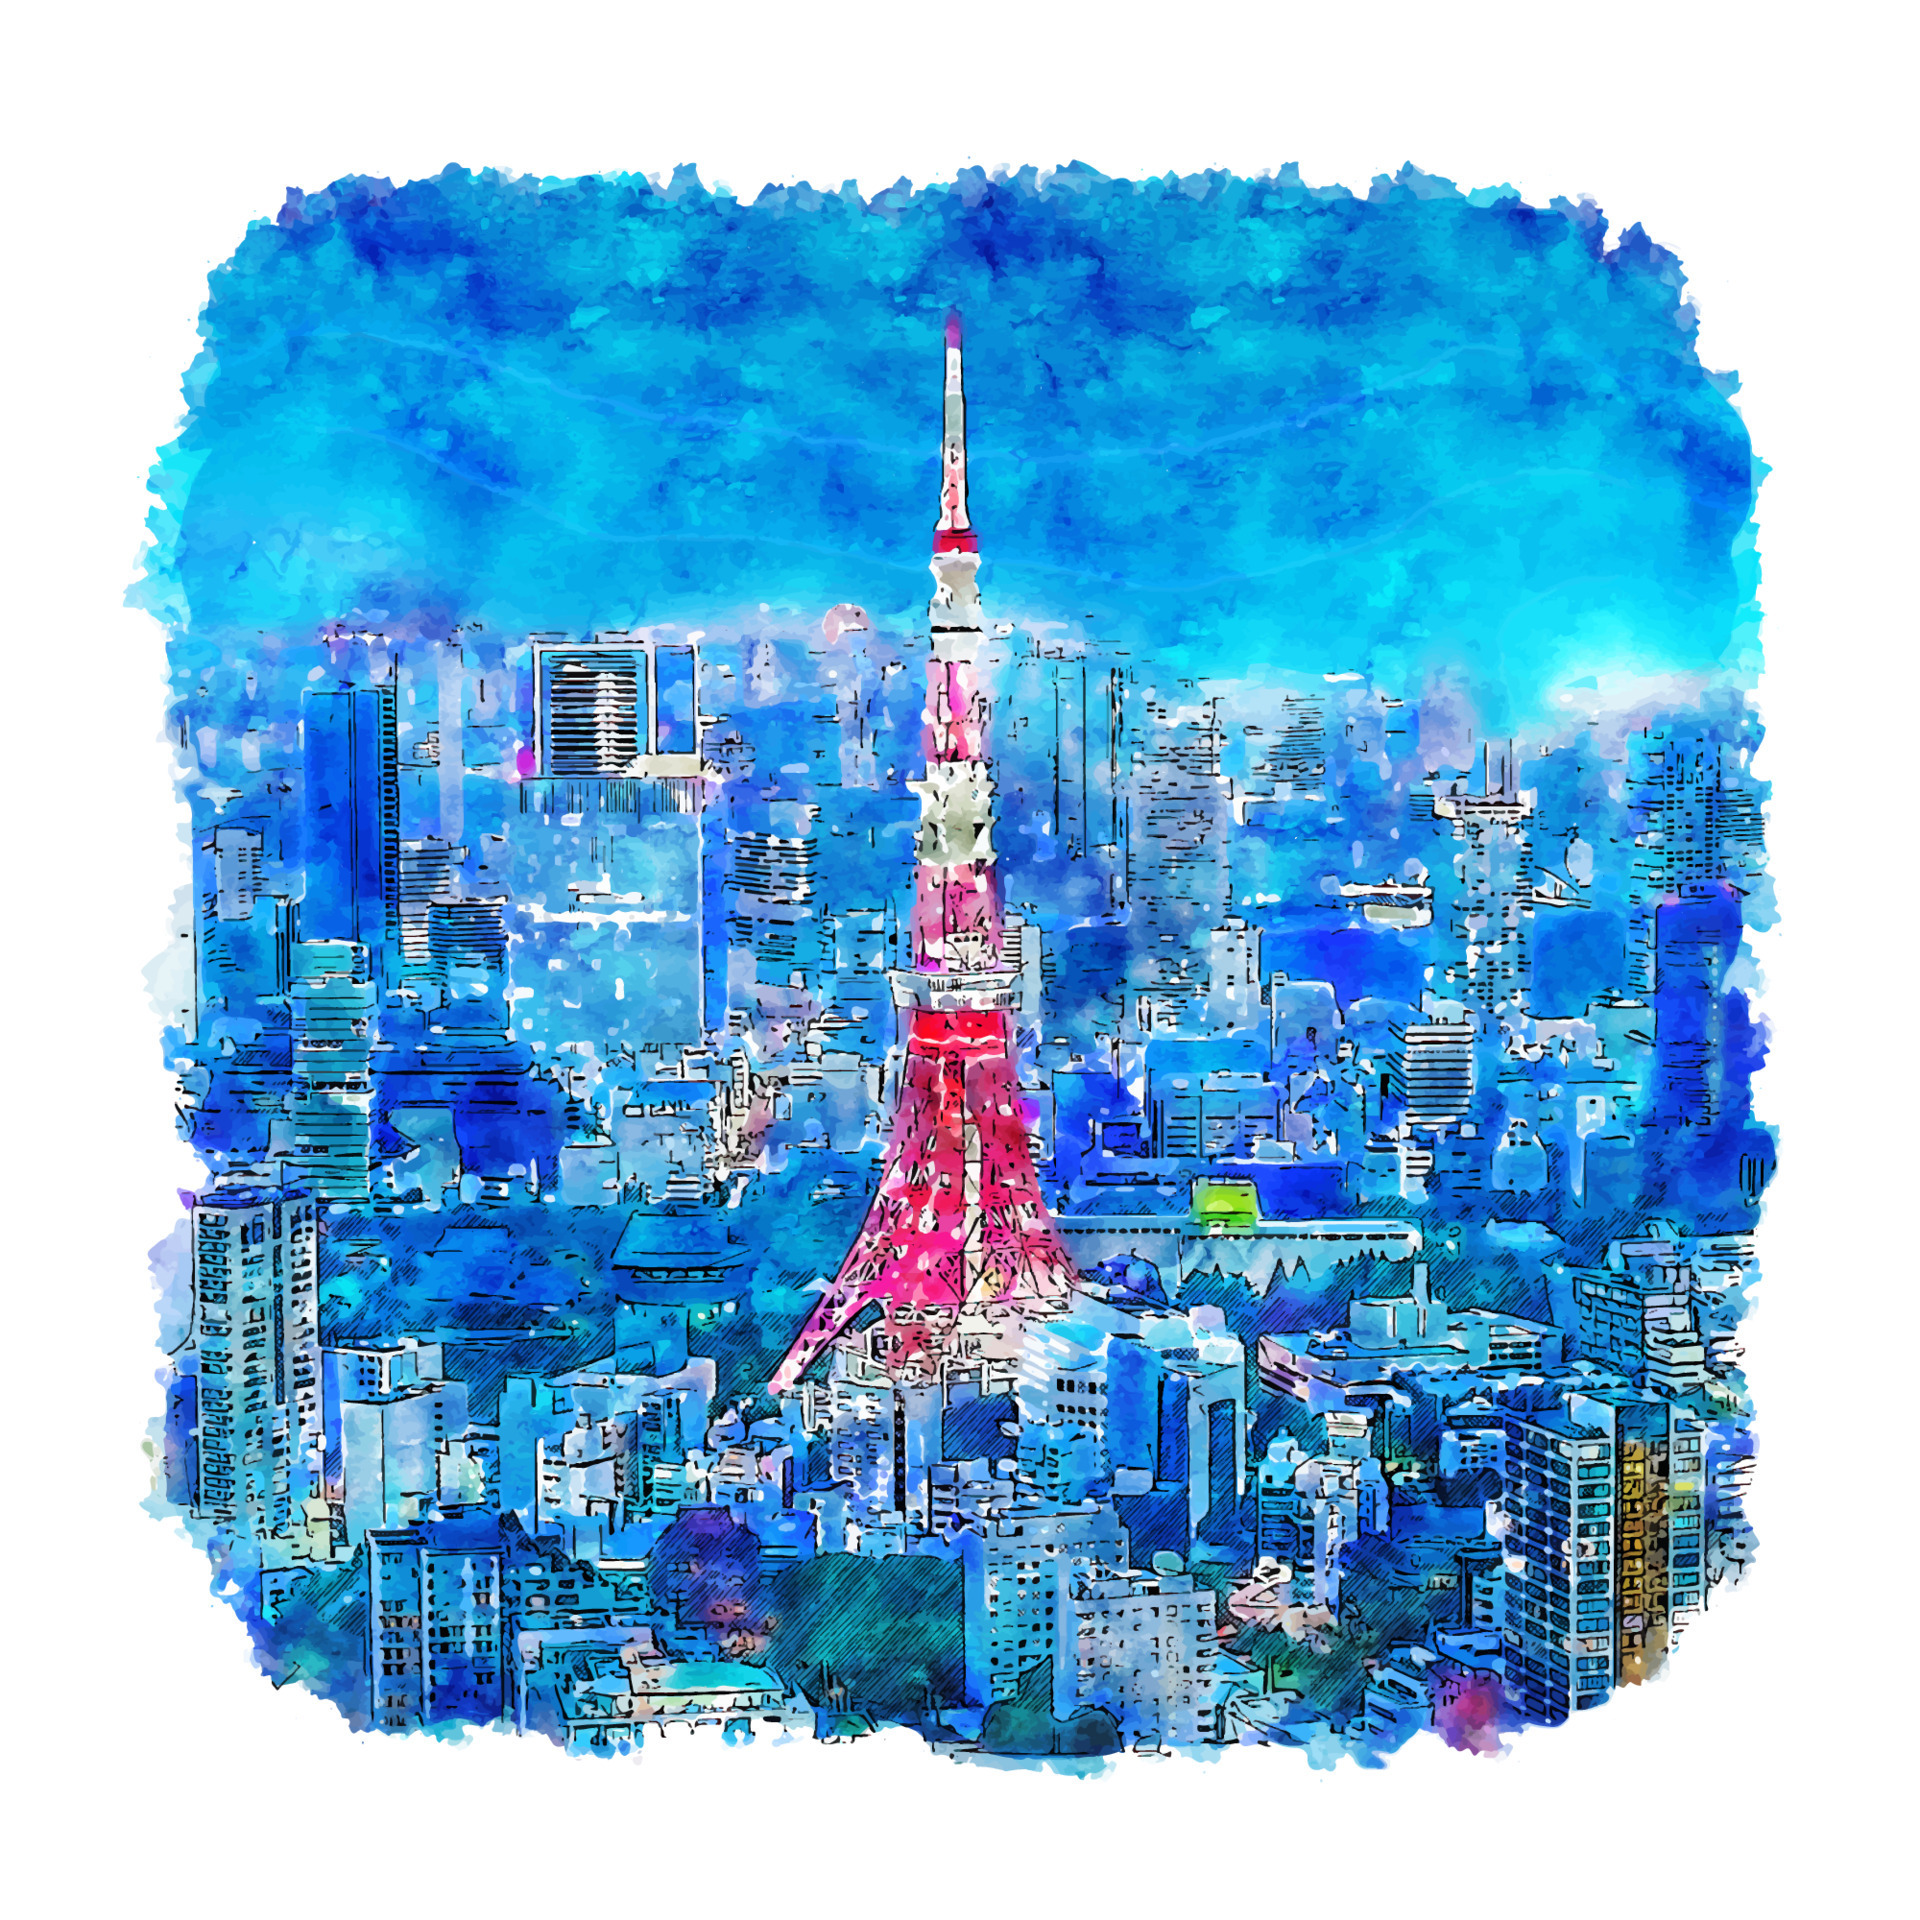 Tokyo Tower Icon Silhouette Illustration Tourism Building Vector Graphic  Pictogram Symbol Clip Art Doodle Sketch Black Sign Stock Vector  Adobe  Stock